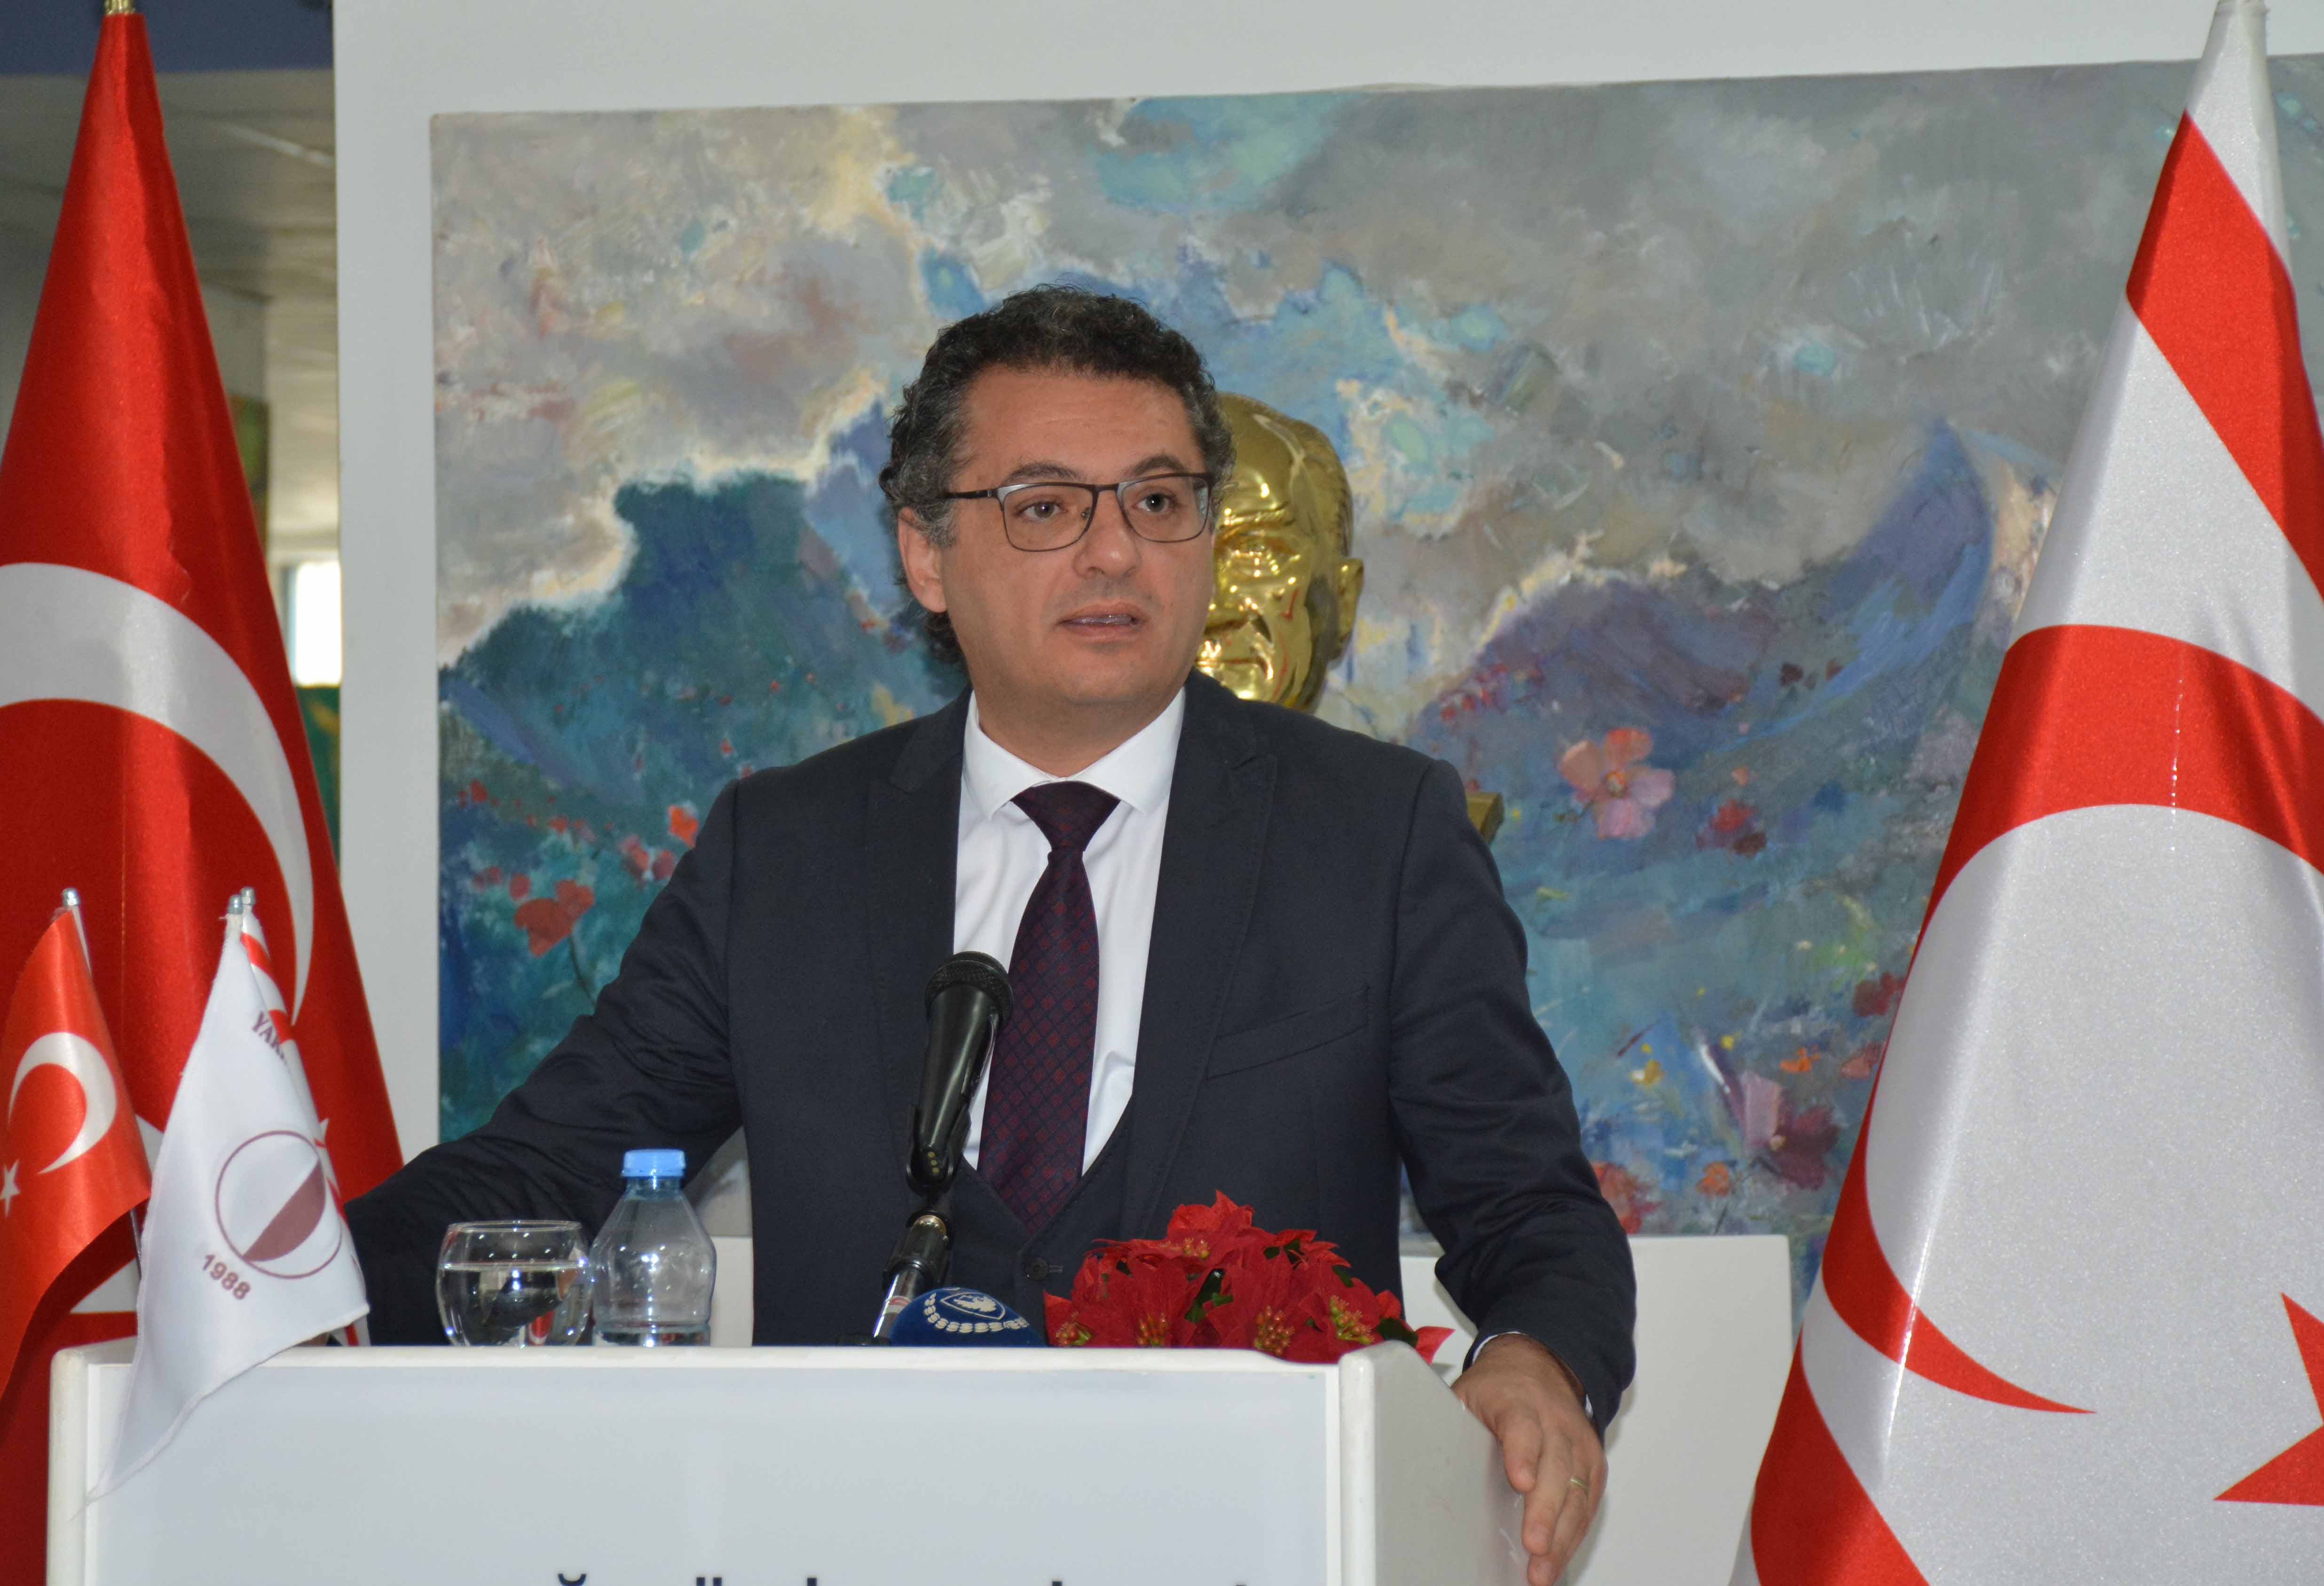 Featuring 142 works of 61 Artists, the Exhibition titled “To Exist with Art “, which was organized by the Cyprus Museum of Modern Arts in Memory of the Tenth Death Anniversary of the Pioneer Turkish Cypriot Painter Ismet Vehit Güney, was opened by the Prime Minister Tufan Erhürman